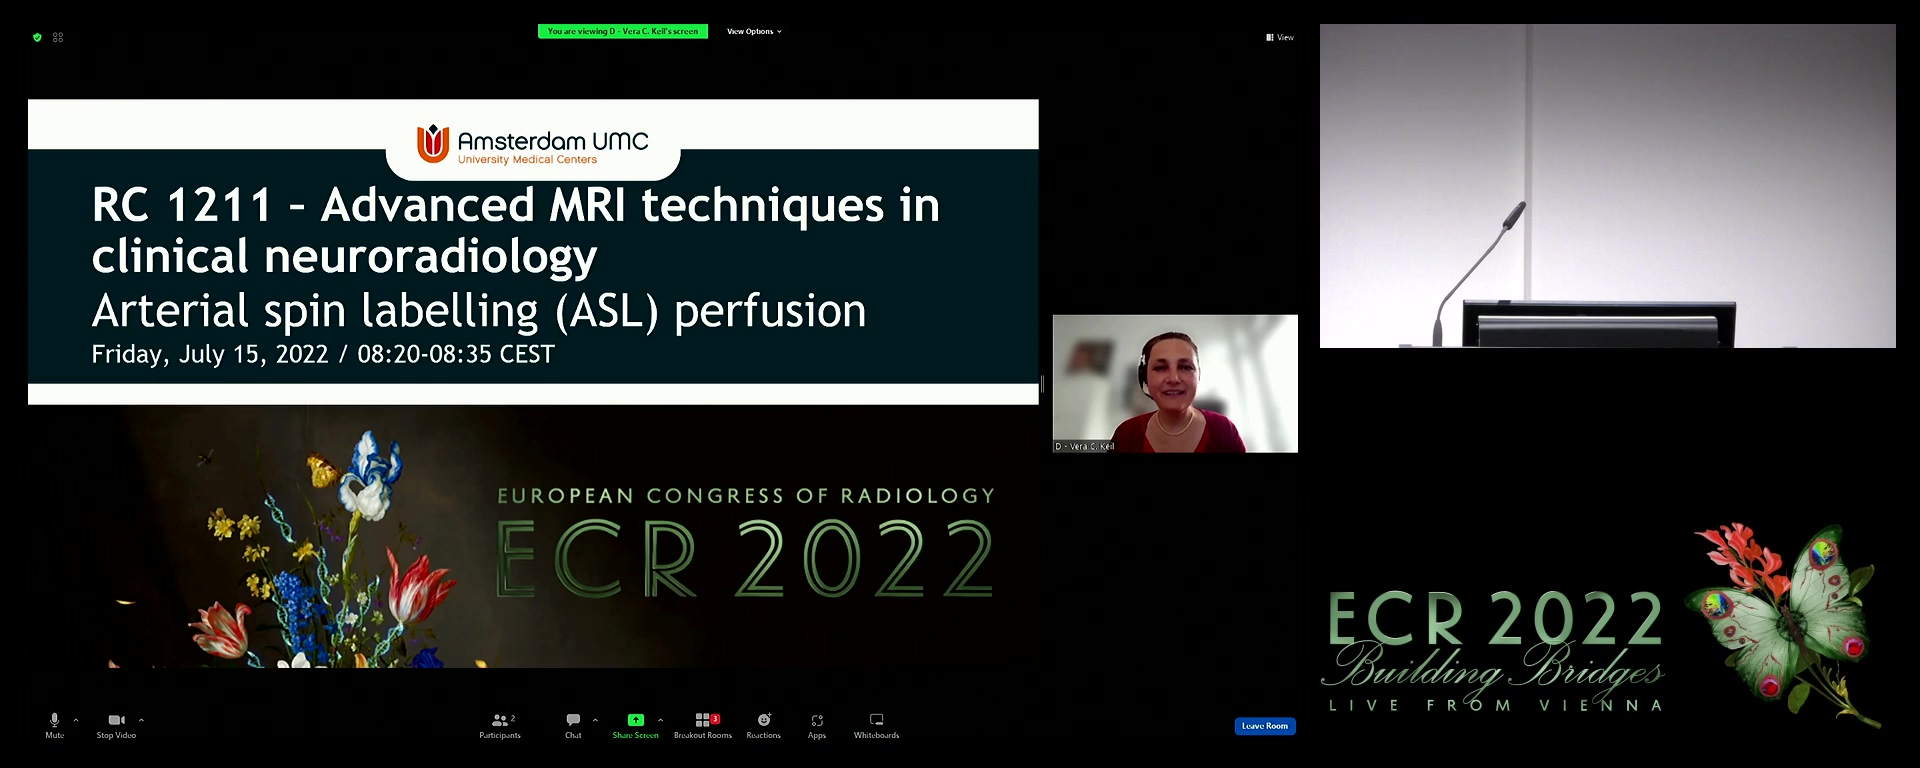 Arterial spin labelling (ASL) perfusion - Vera C. Keil, Amsterdam / NL